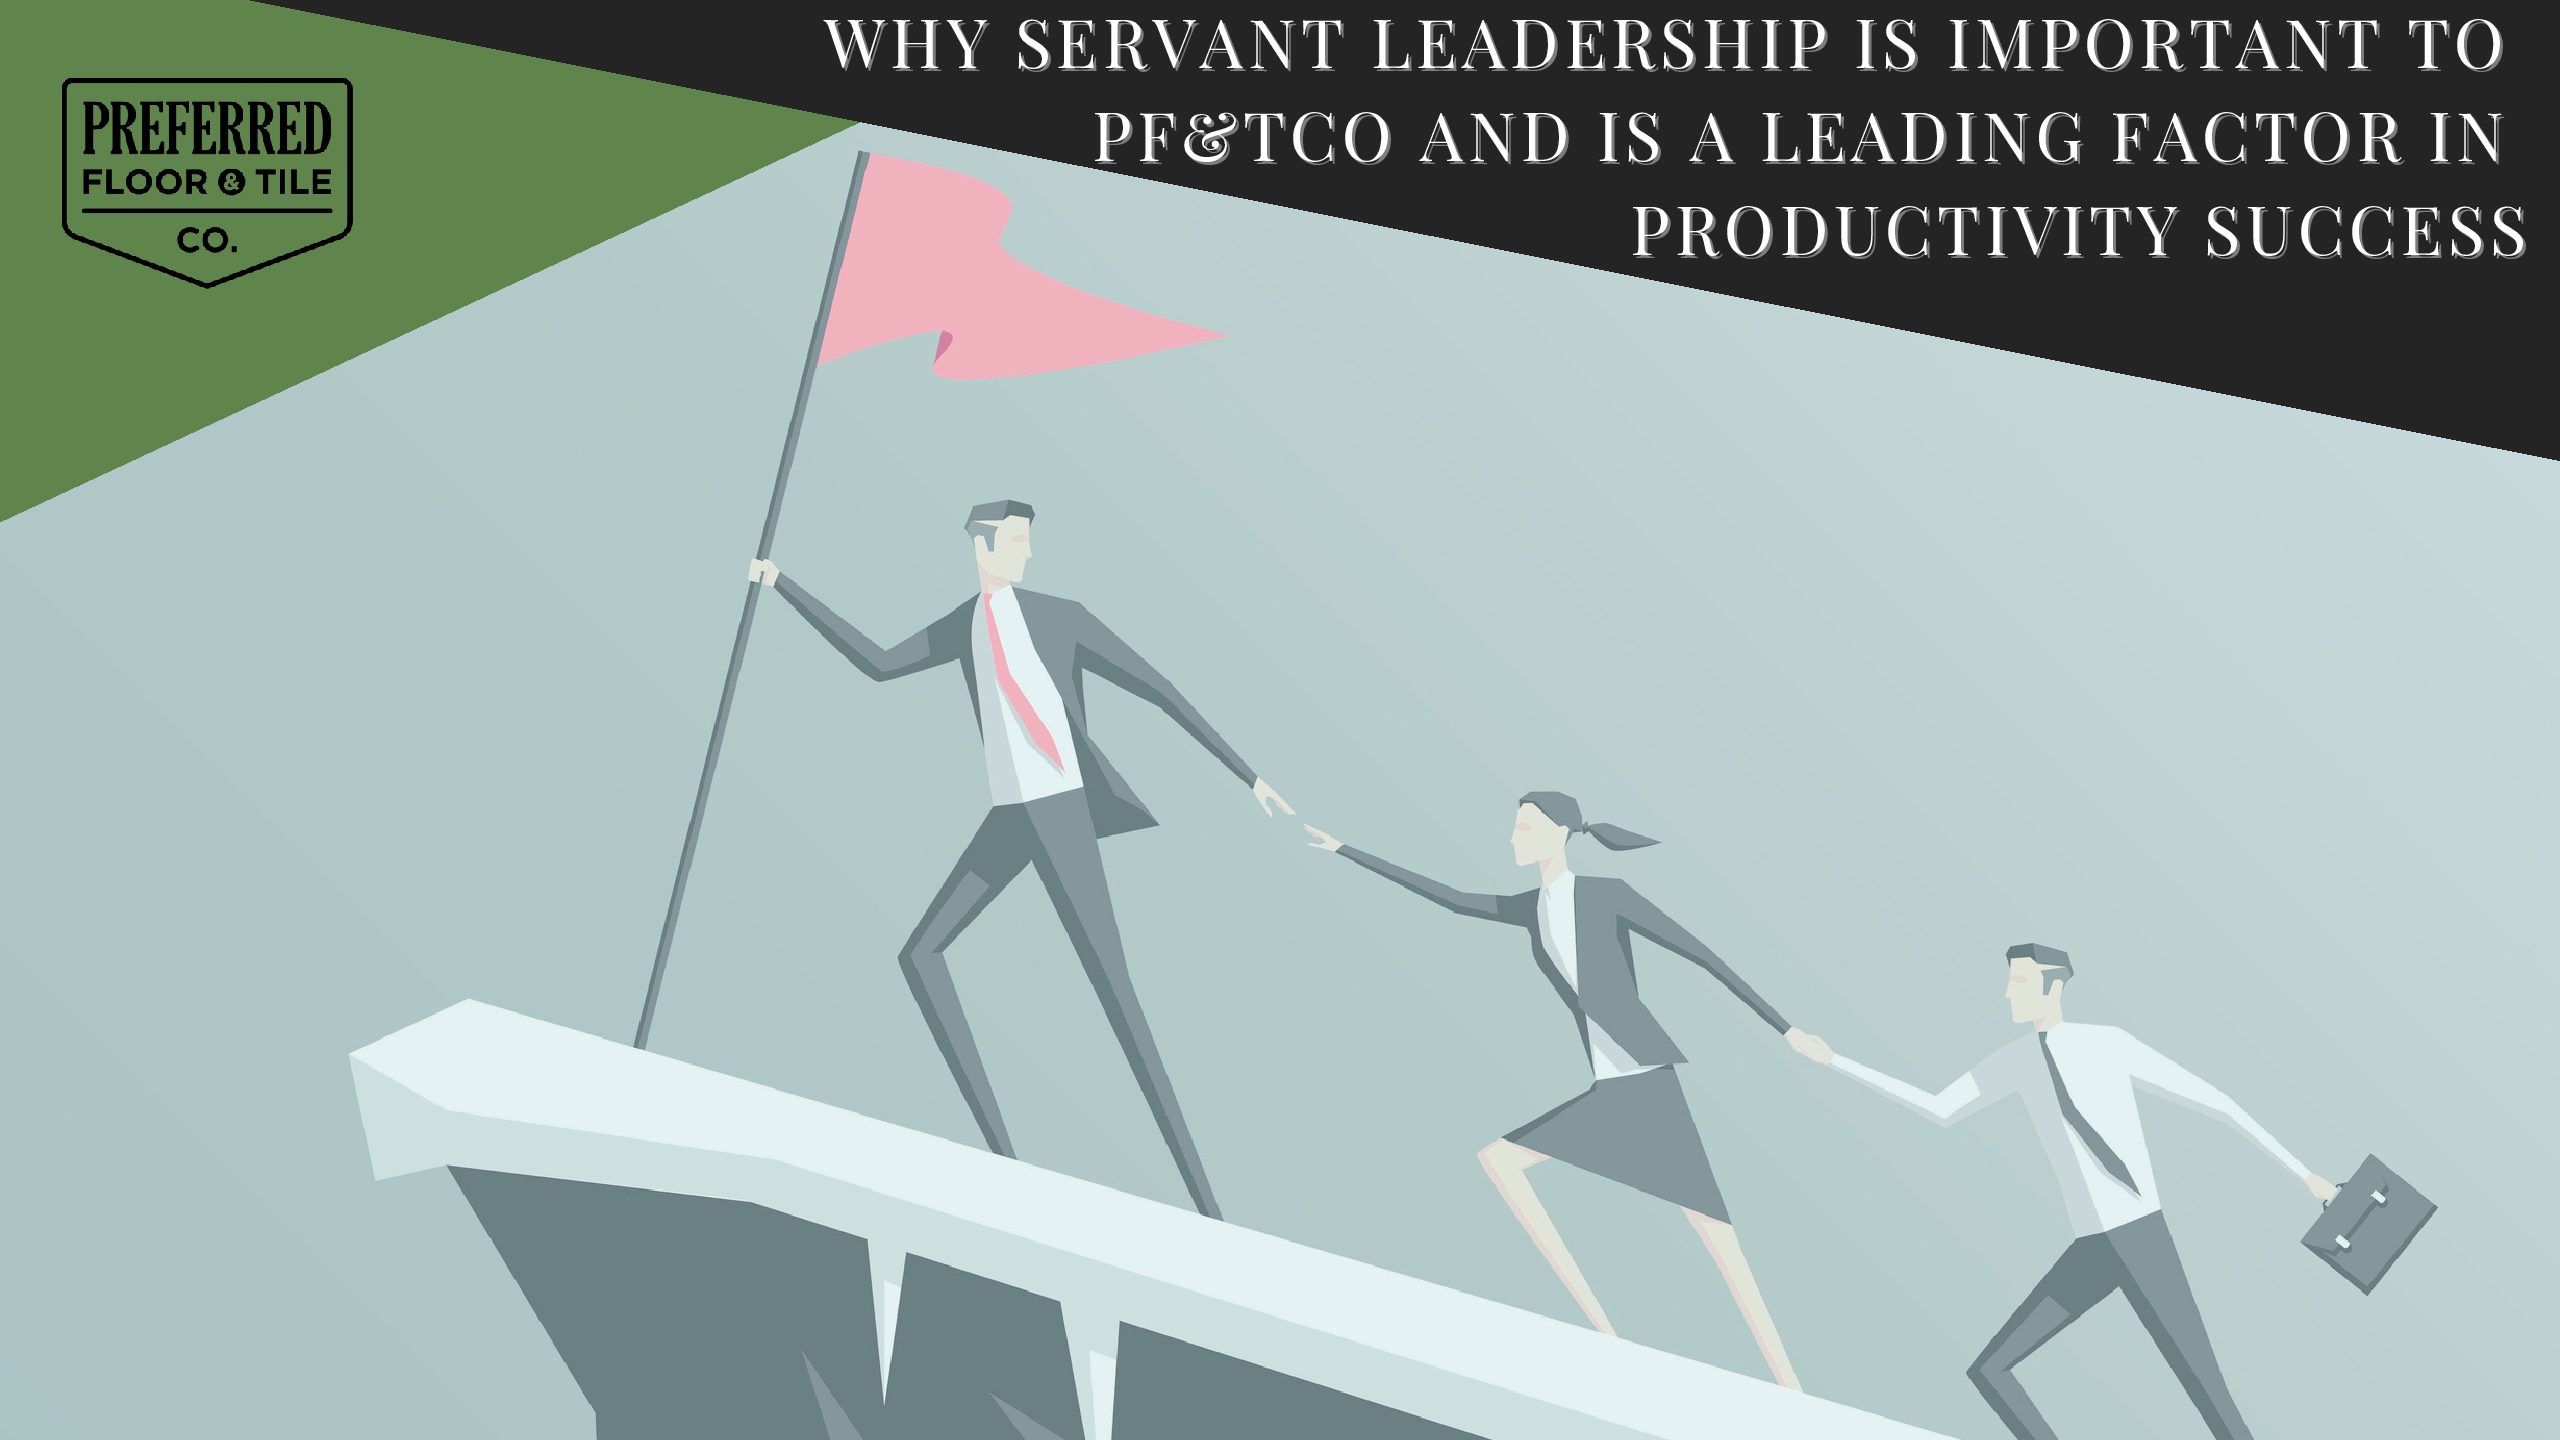 Why Servant Leadership is Important to PF&TCO and is a Leading Factor in Productivity Success